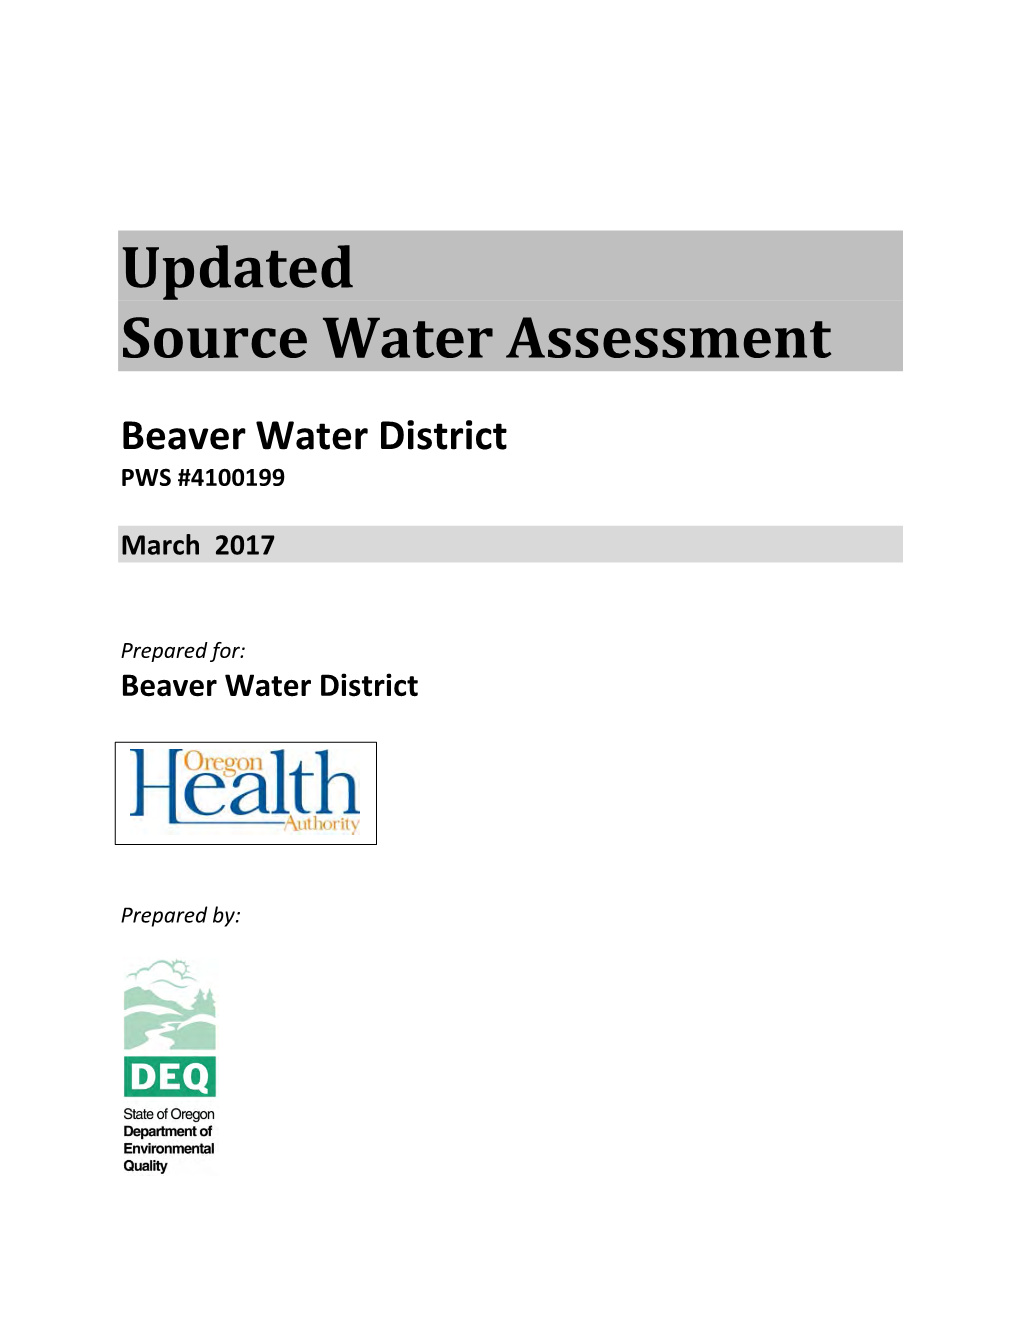 Updated Source Water Assessment